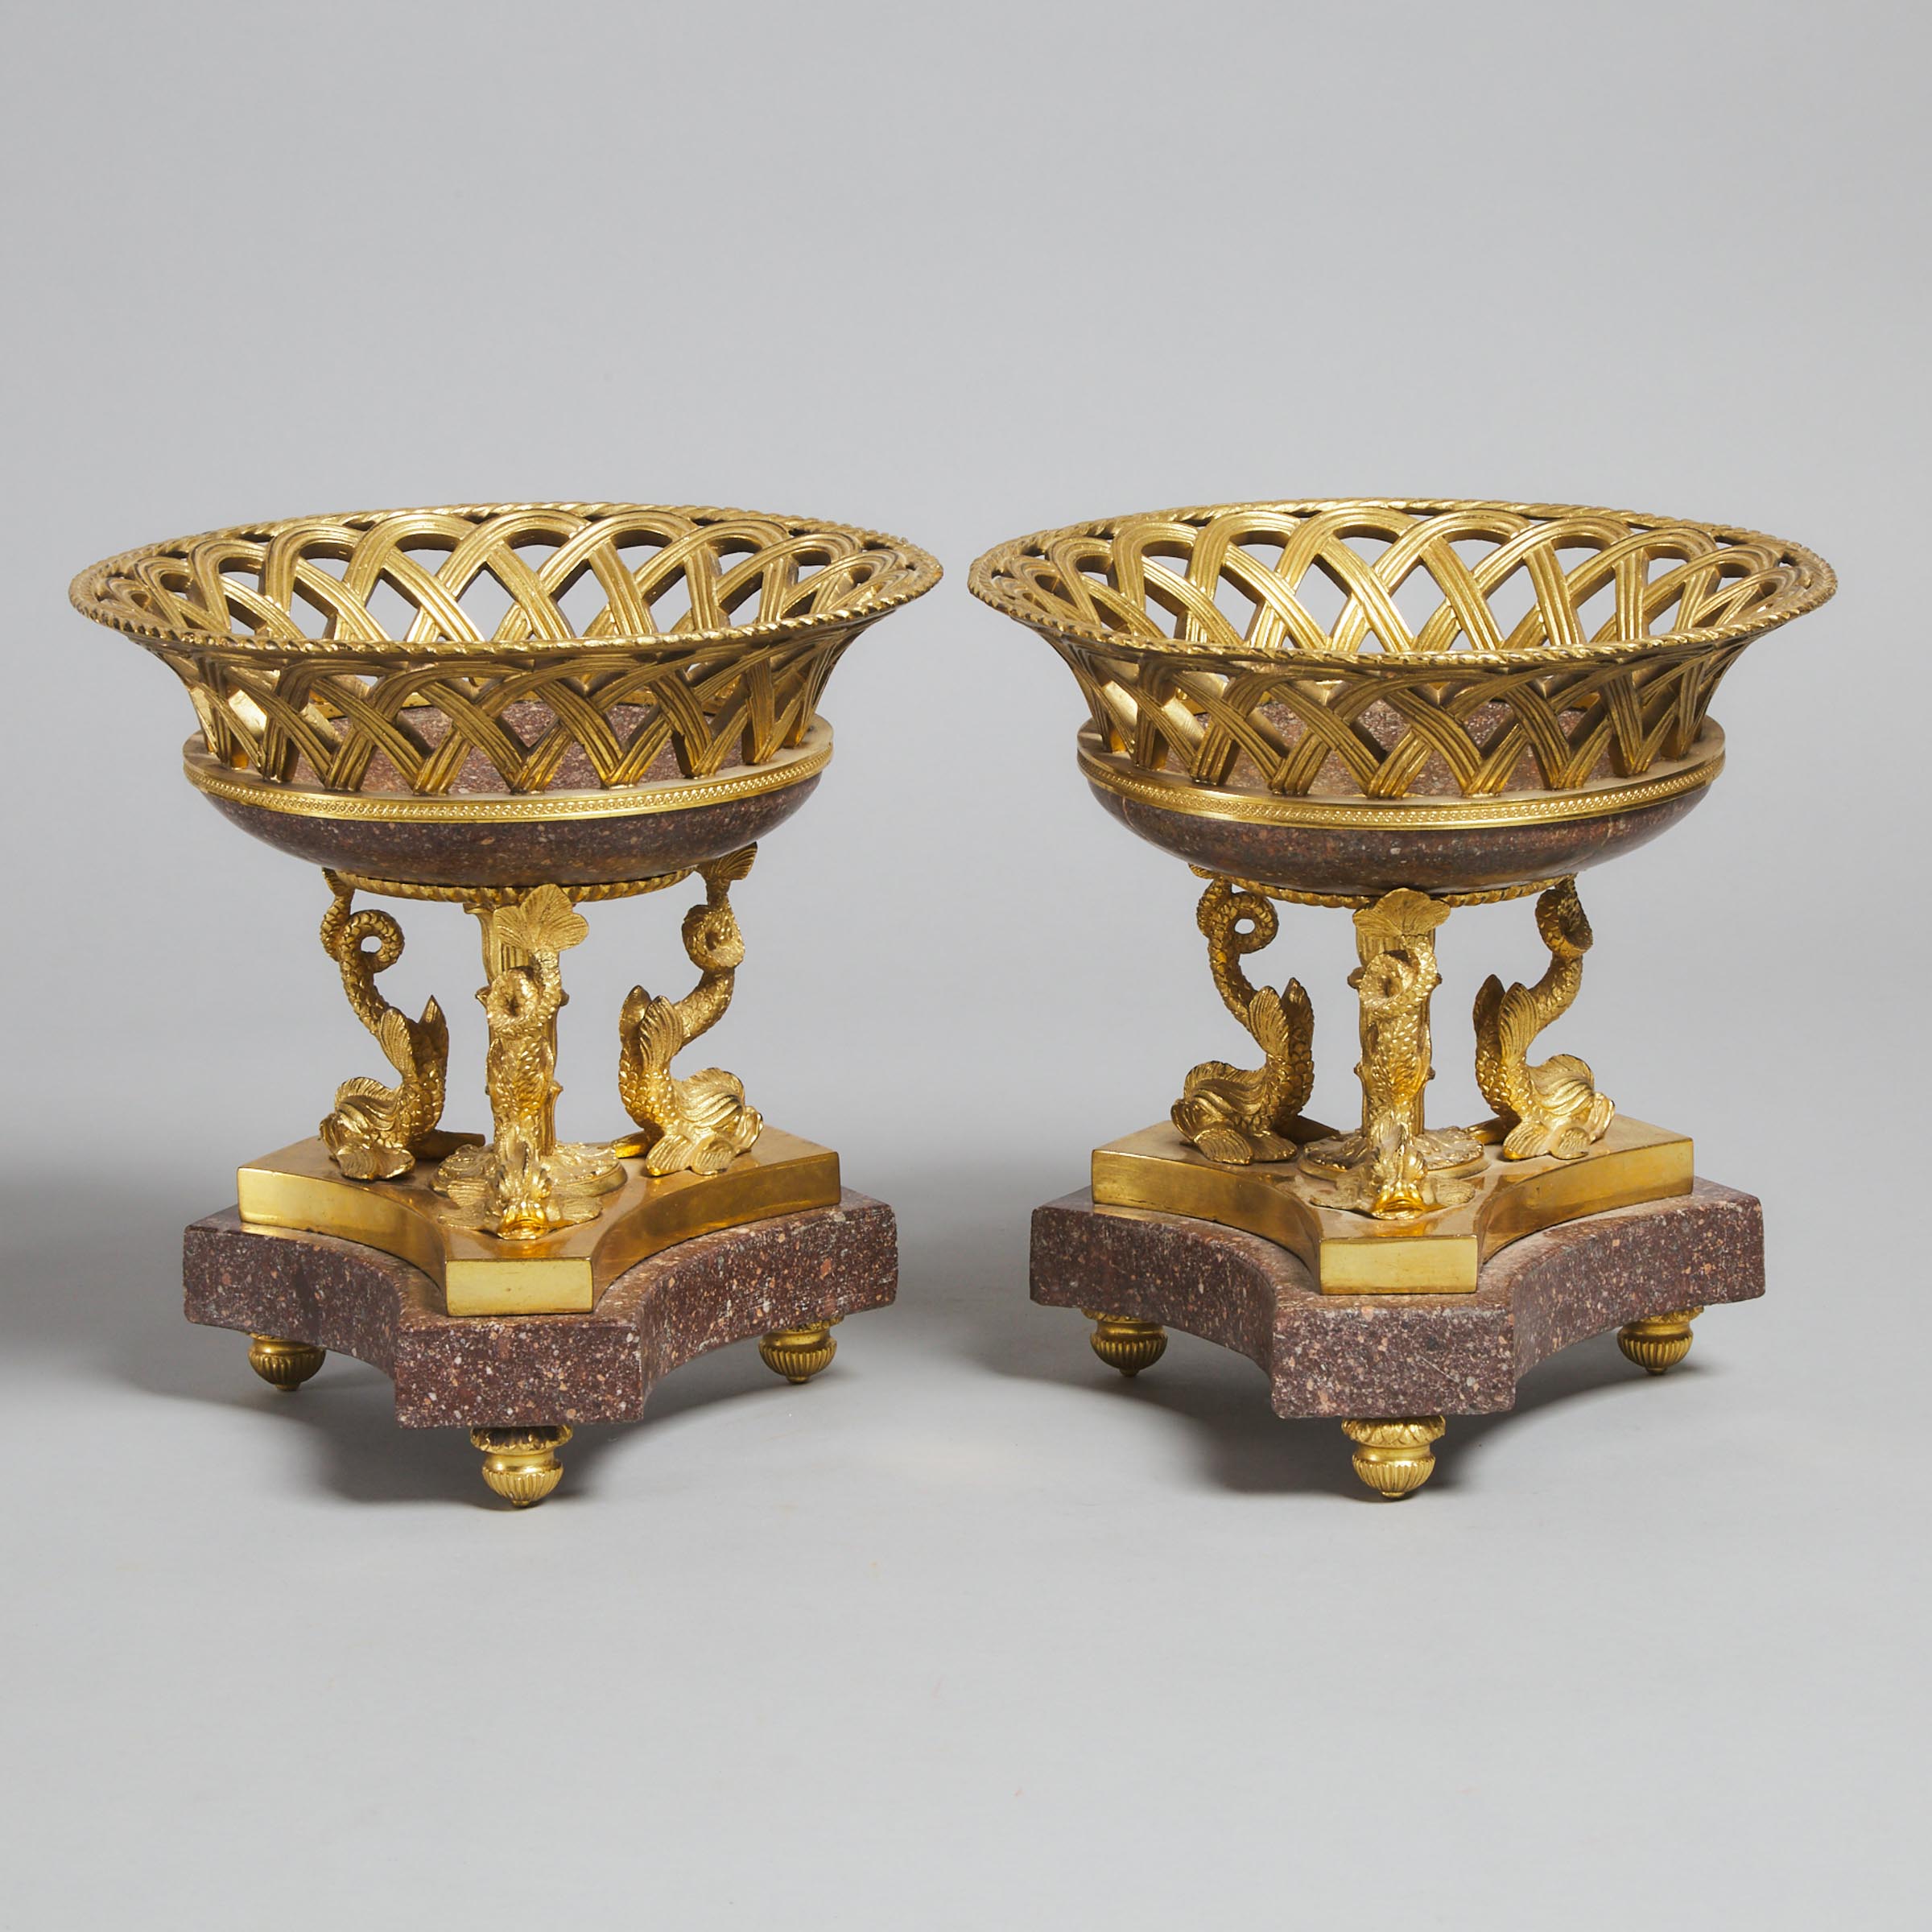 Pair of Gilt Bronze and Porphyry Tazzas, 19th/early 20th century century